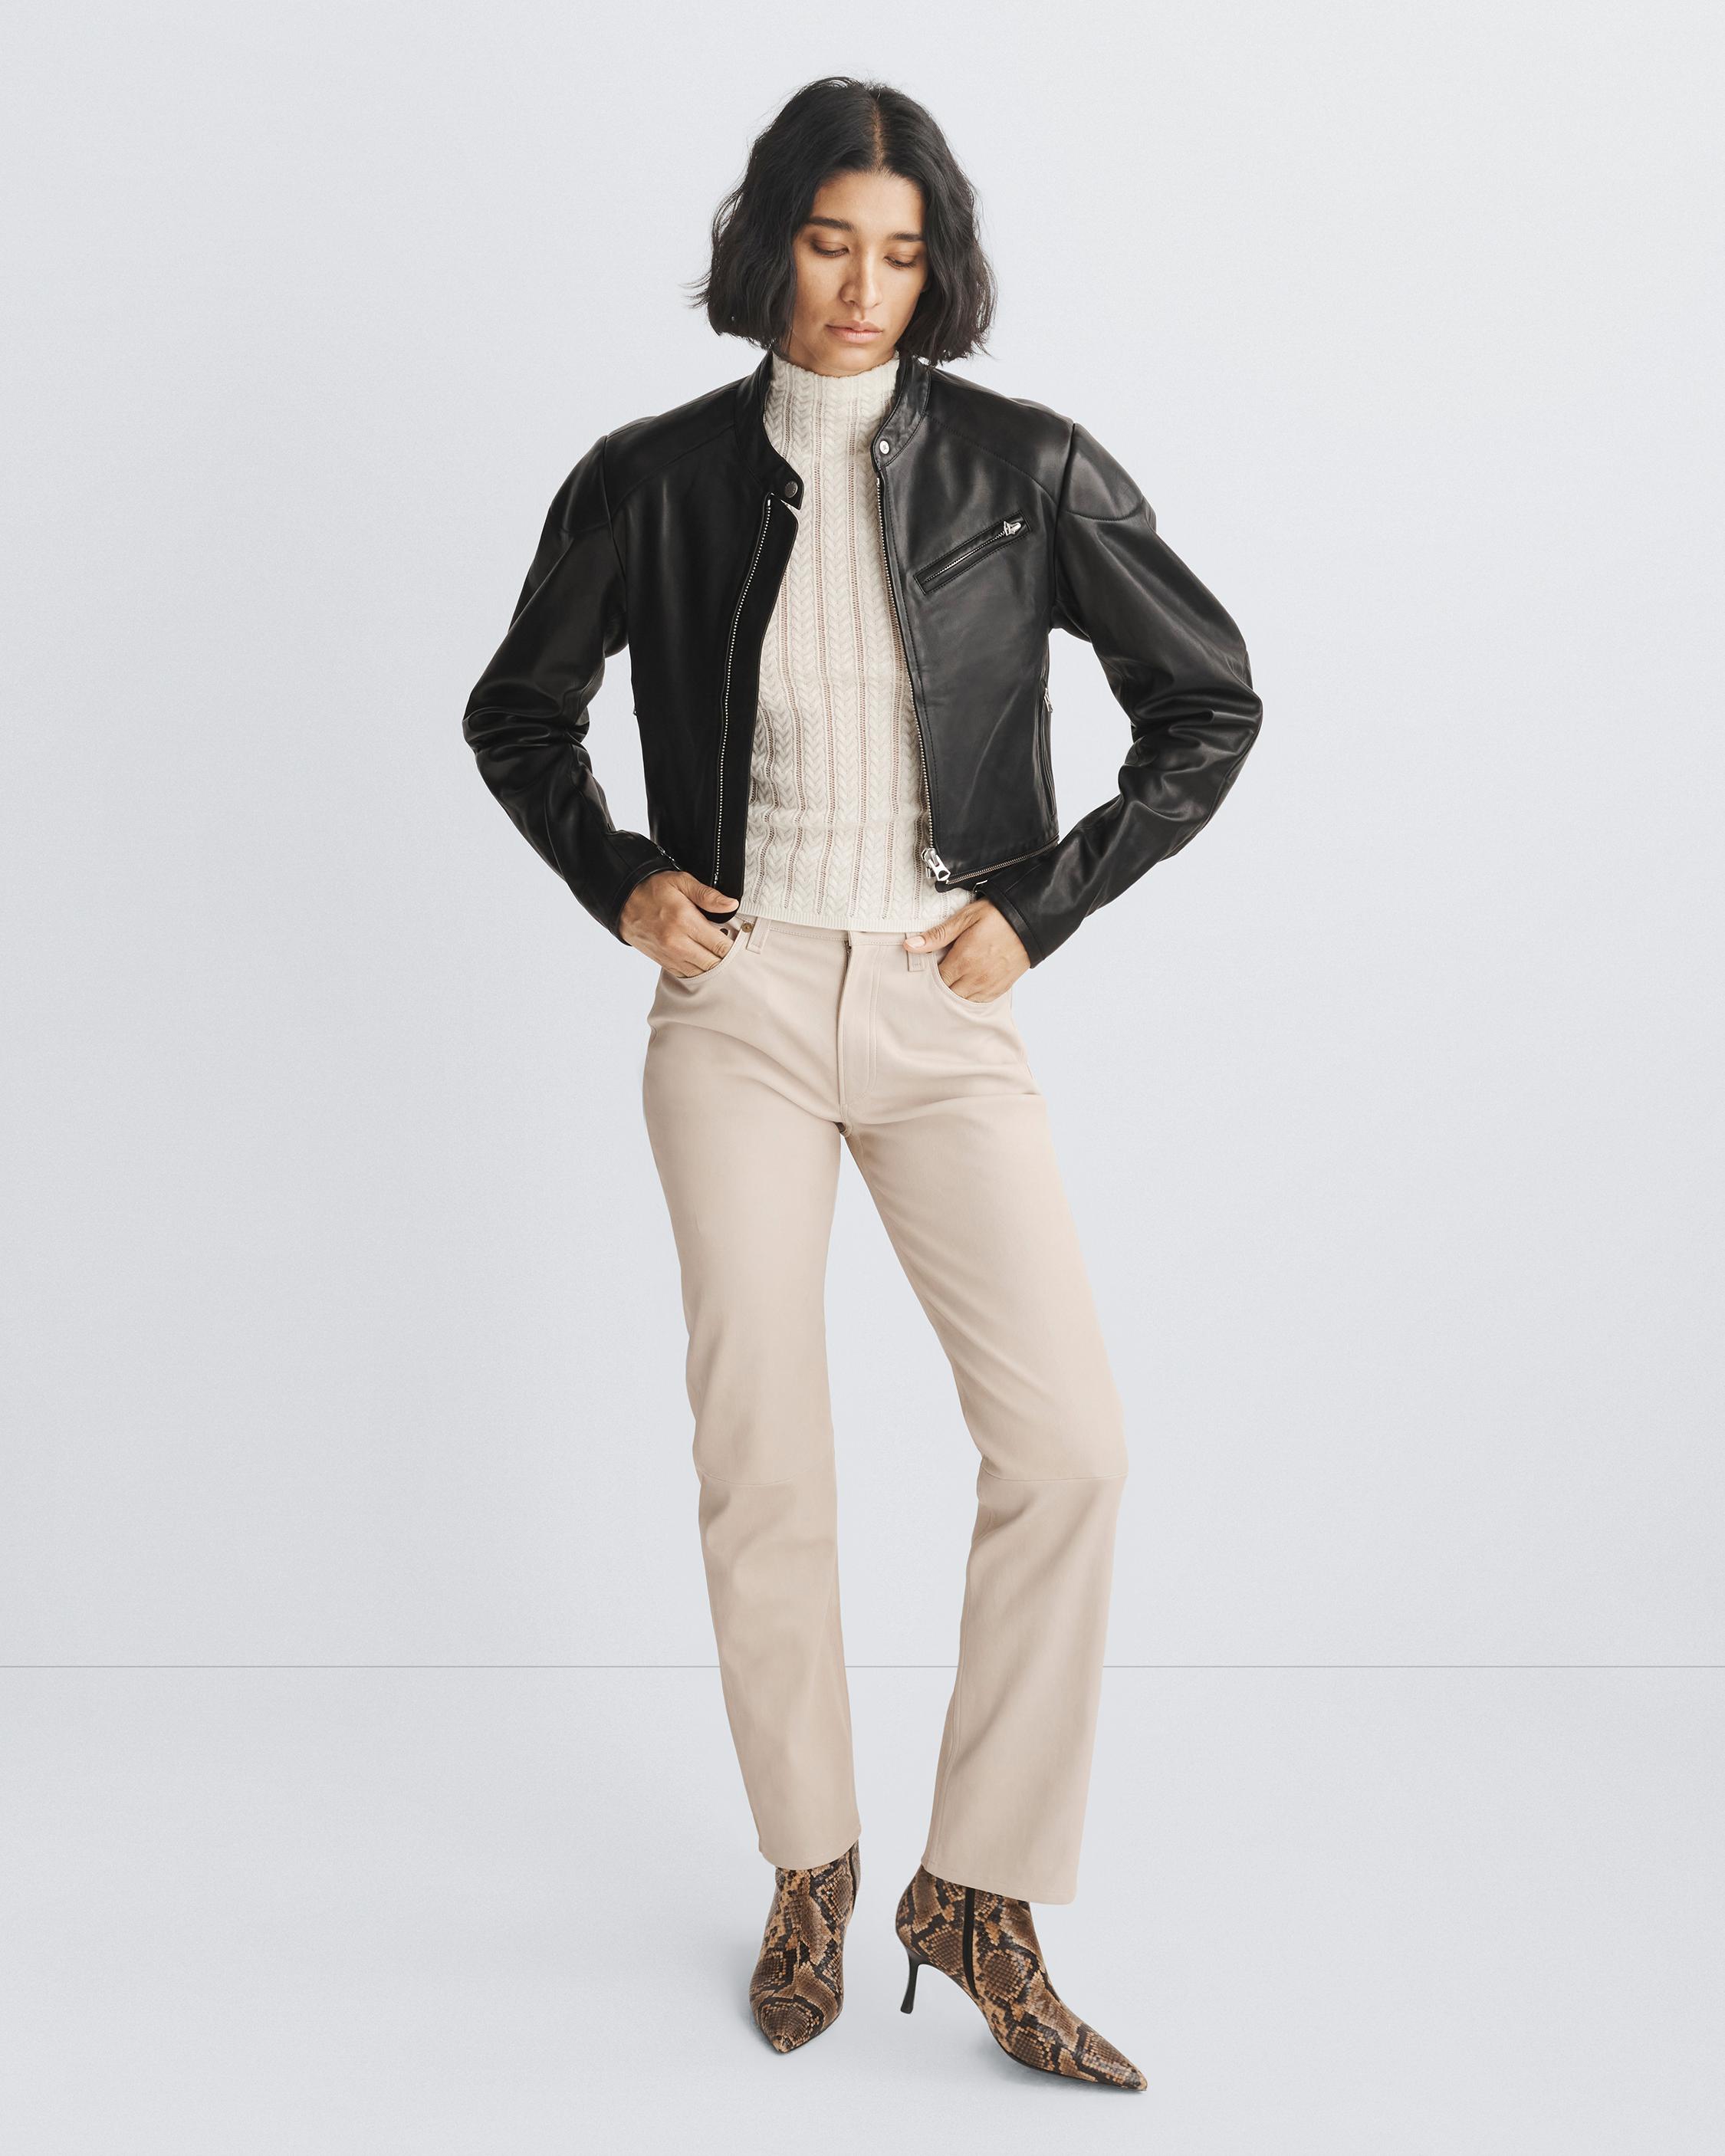 HARLOW HIGH RISE VEGAN LEATHER PANTS - CLEARANCE